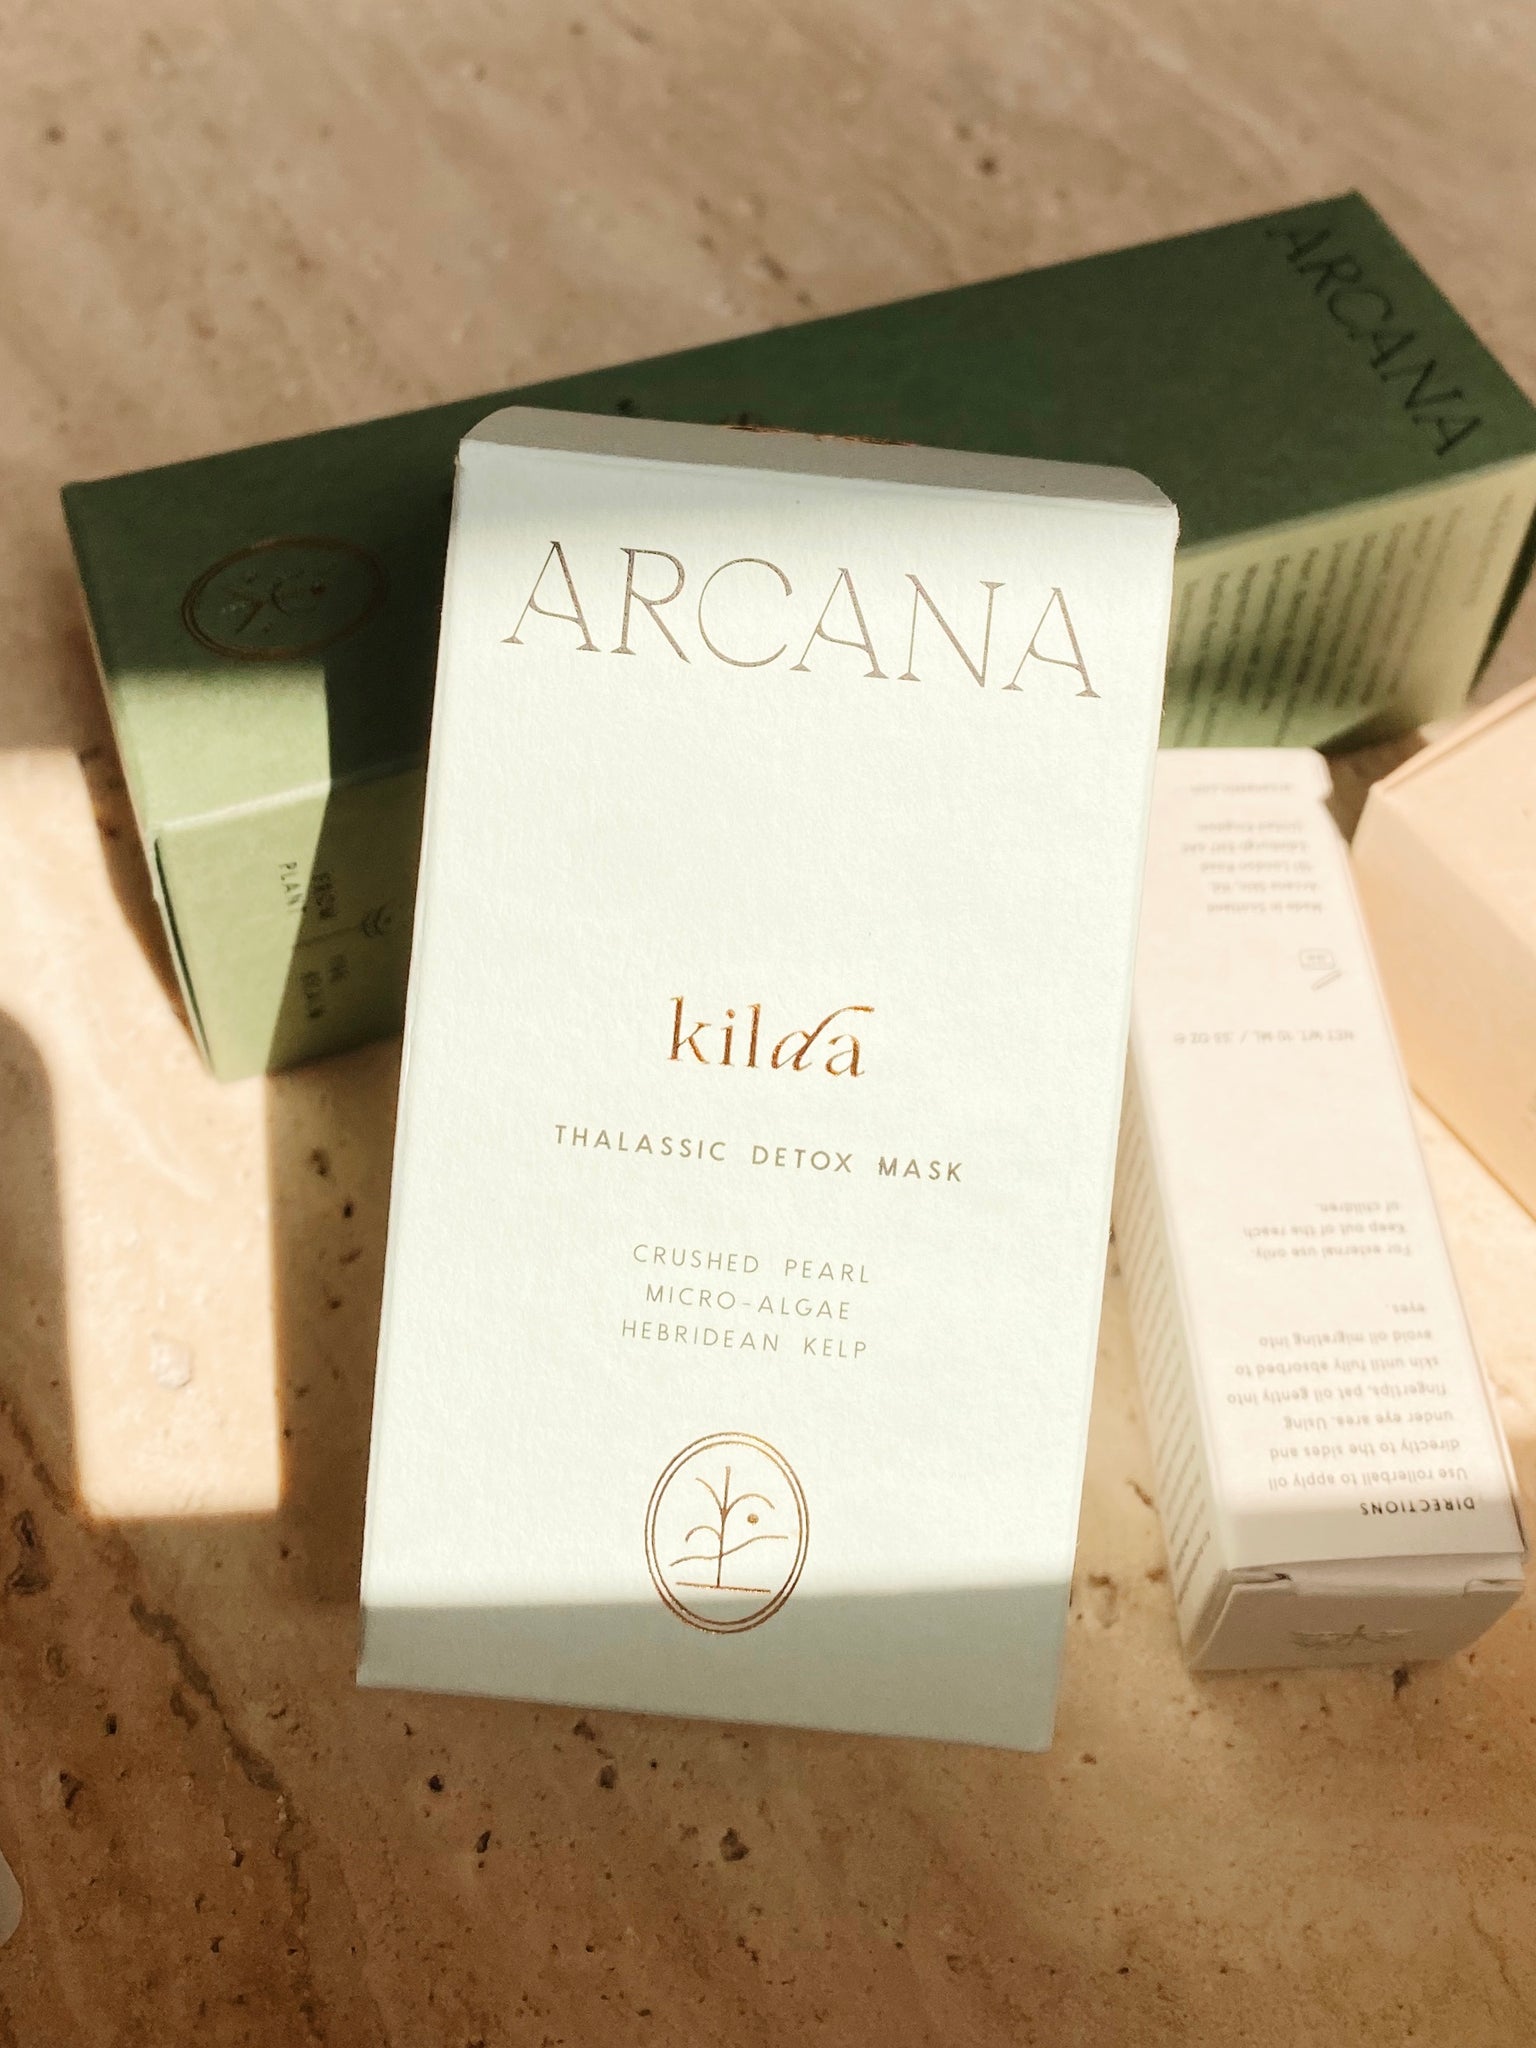 Q&A with the Founder of Arcana Skin.